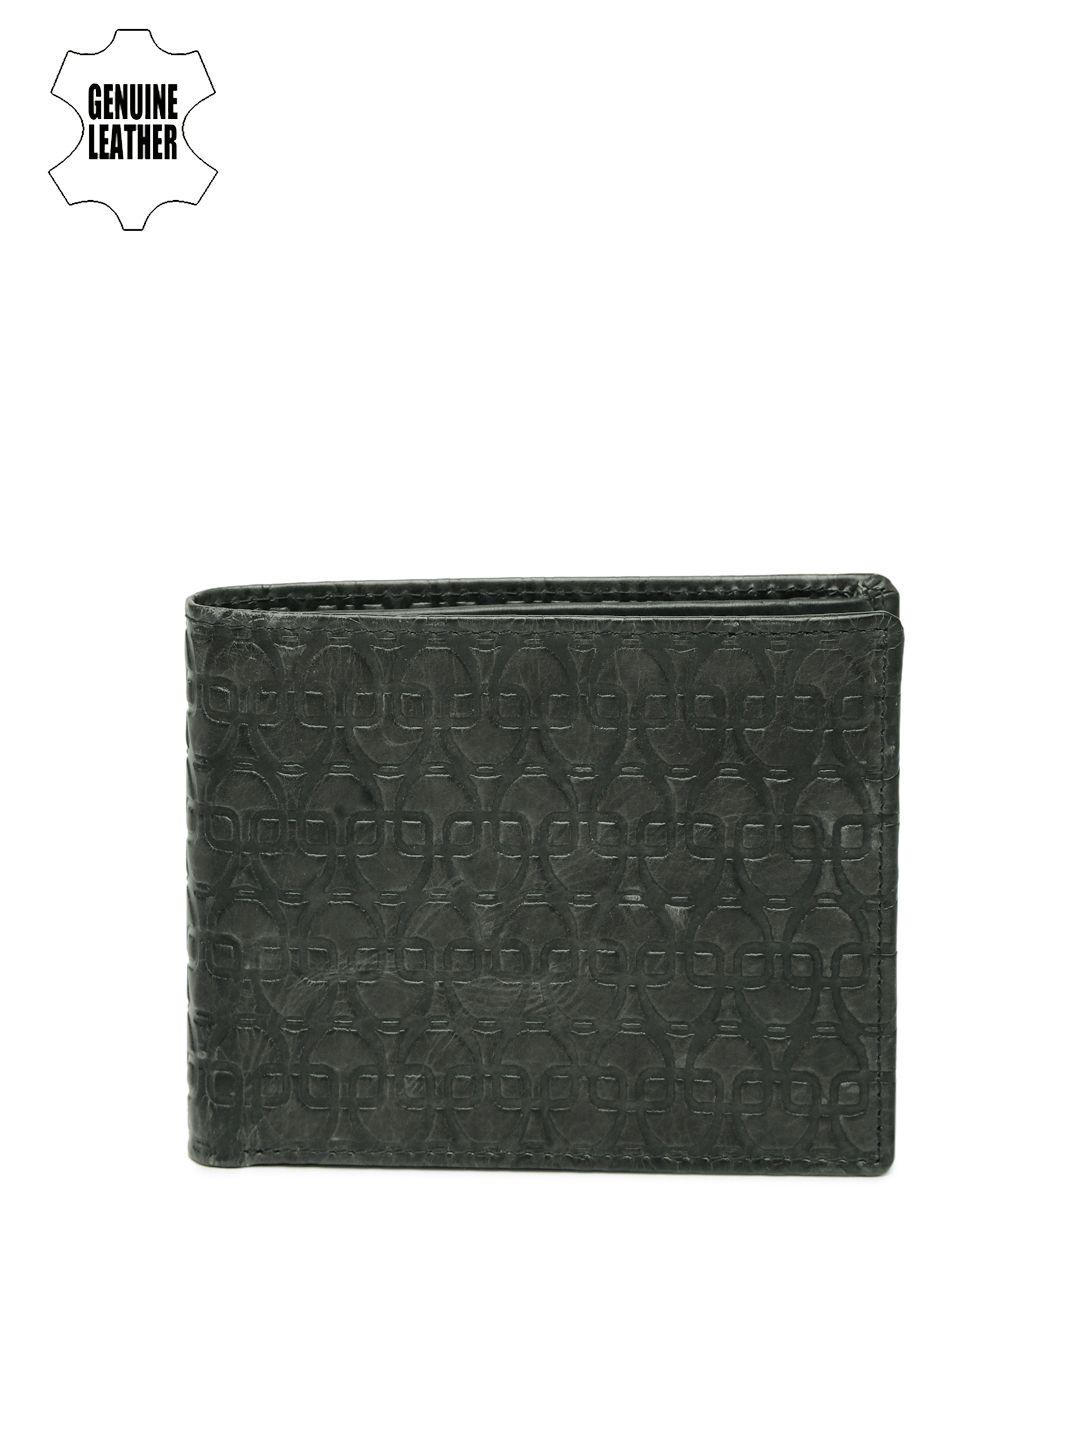 u.s. polo assn. men charcoal grey textured genuine leather wallet